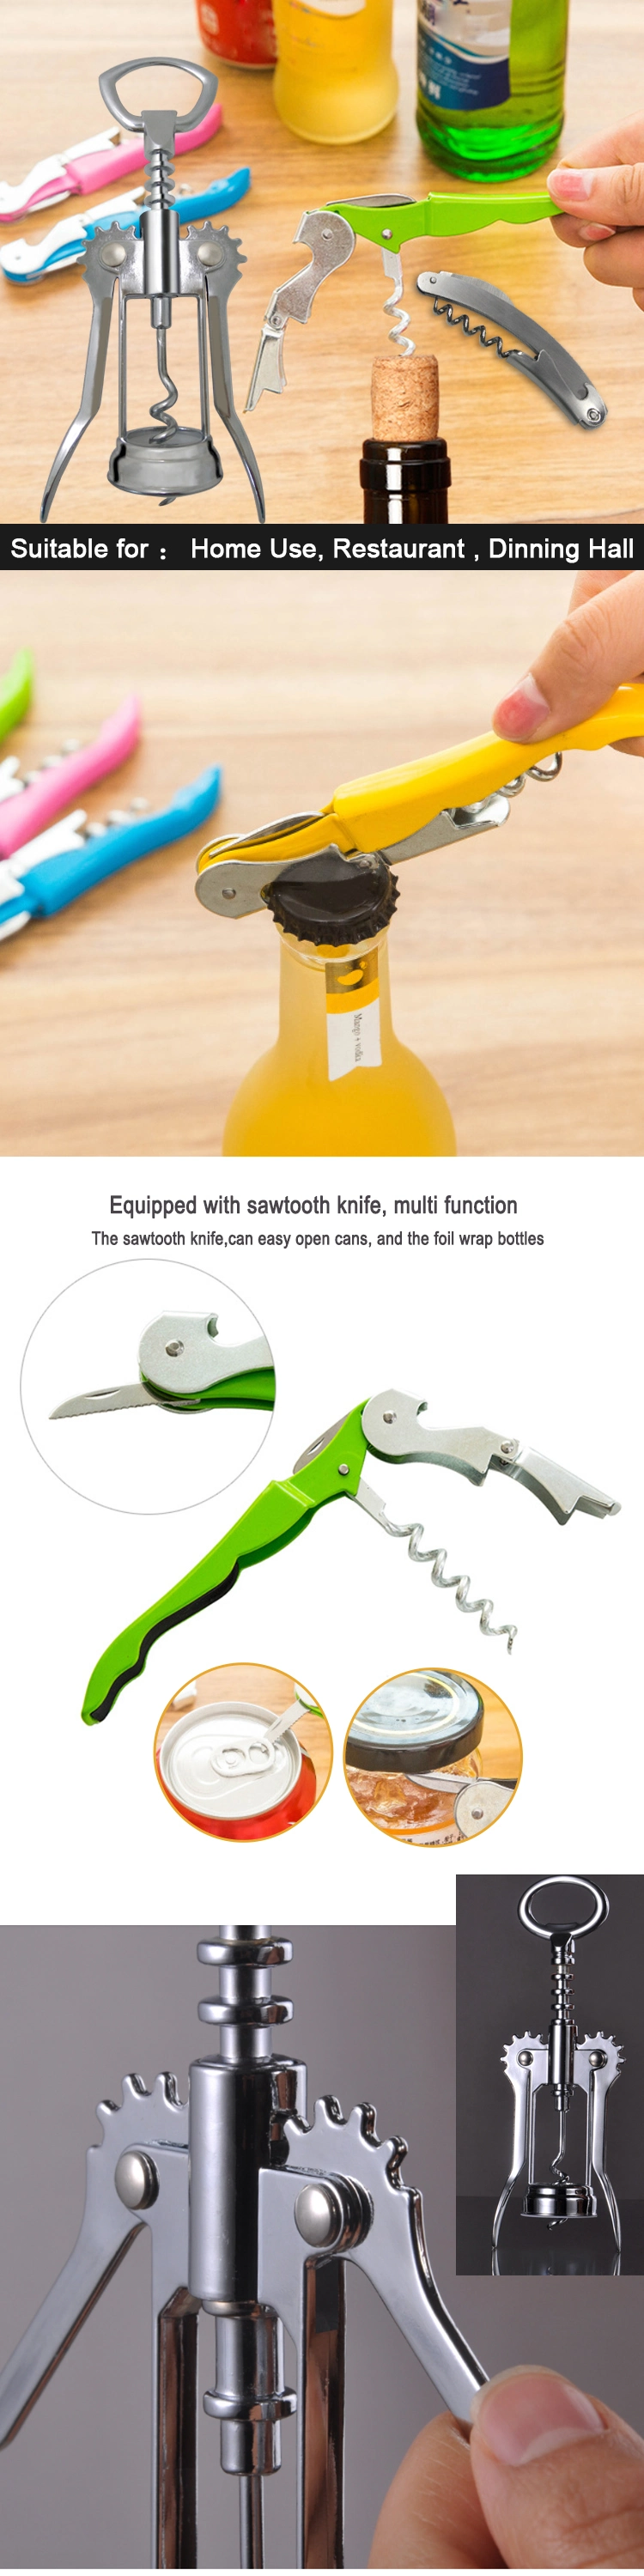 Hot Selling Portable Multifunctional Wine Bottle Opener with Corkscrew